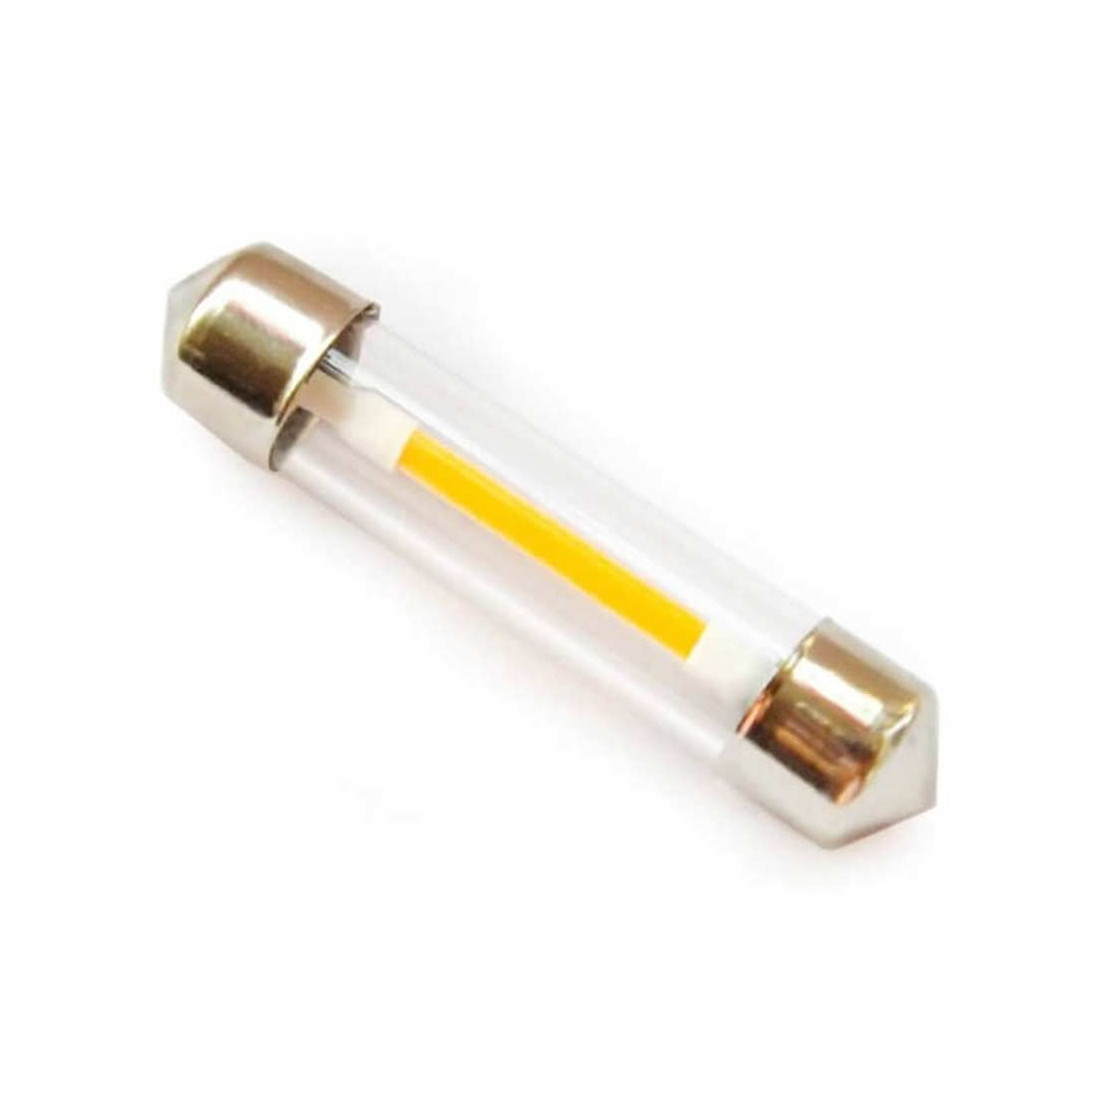 Les ampoules LED AR111 basse consommation ✓ Starled